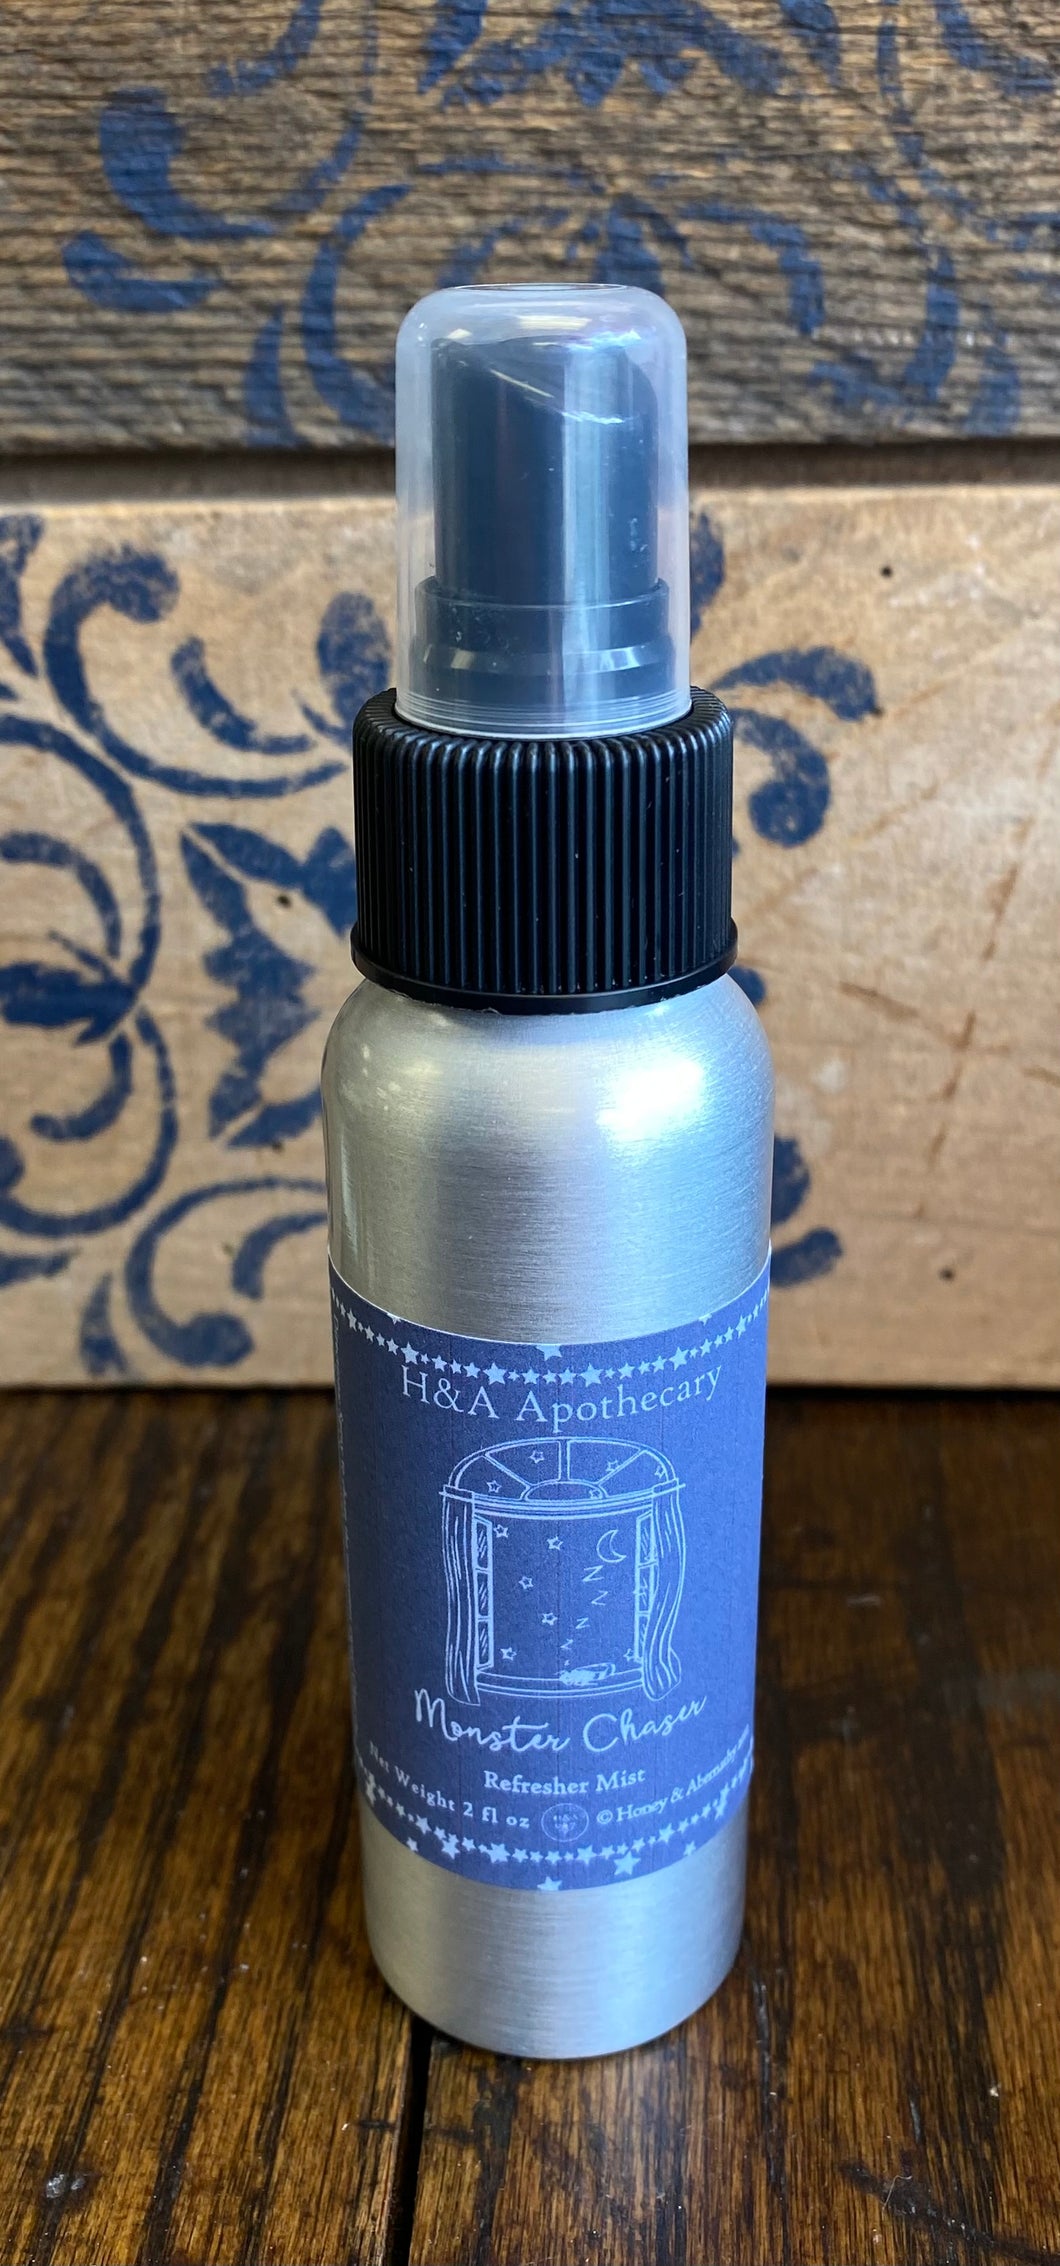 H&A Apothecary Monster Chaser Refresher Mist